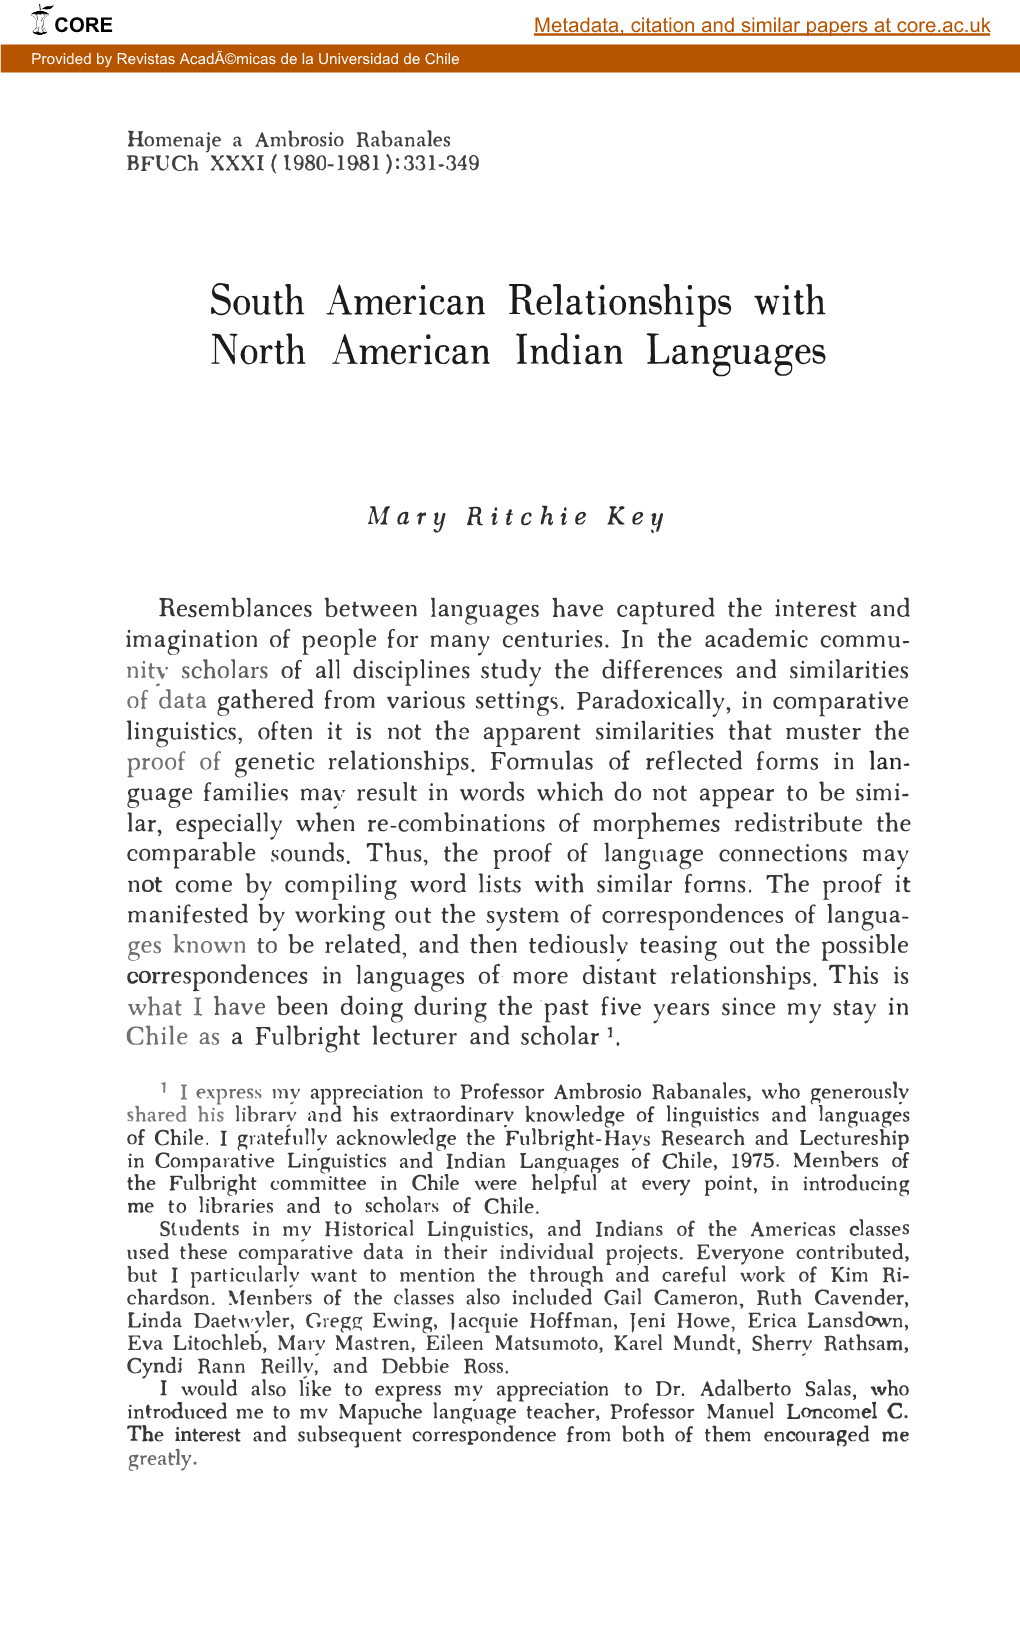 South American Relationships with N Orth American Indian Languages